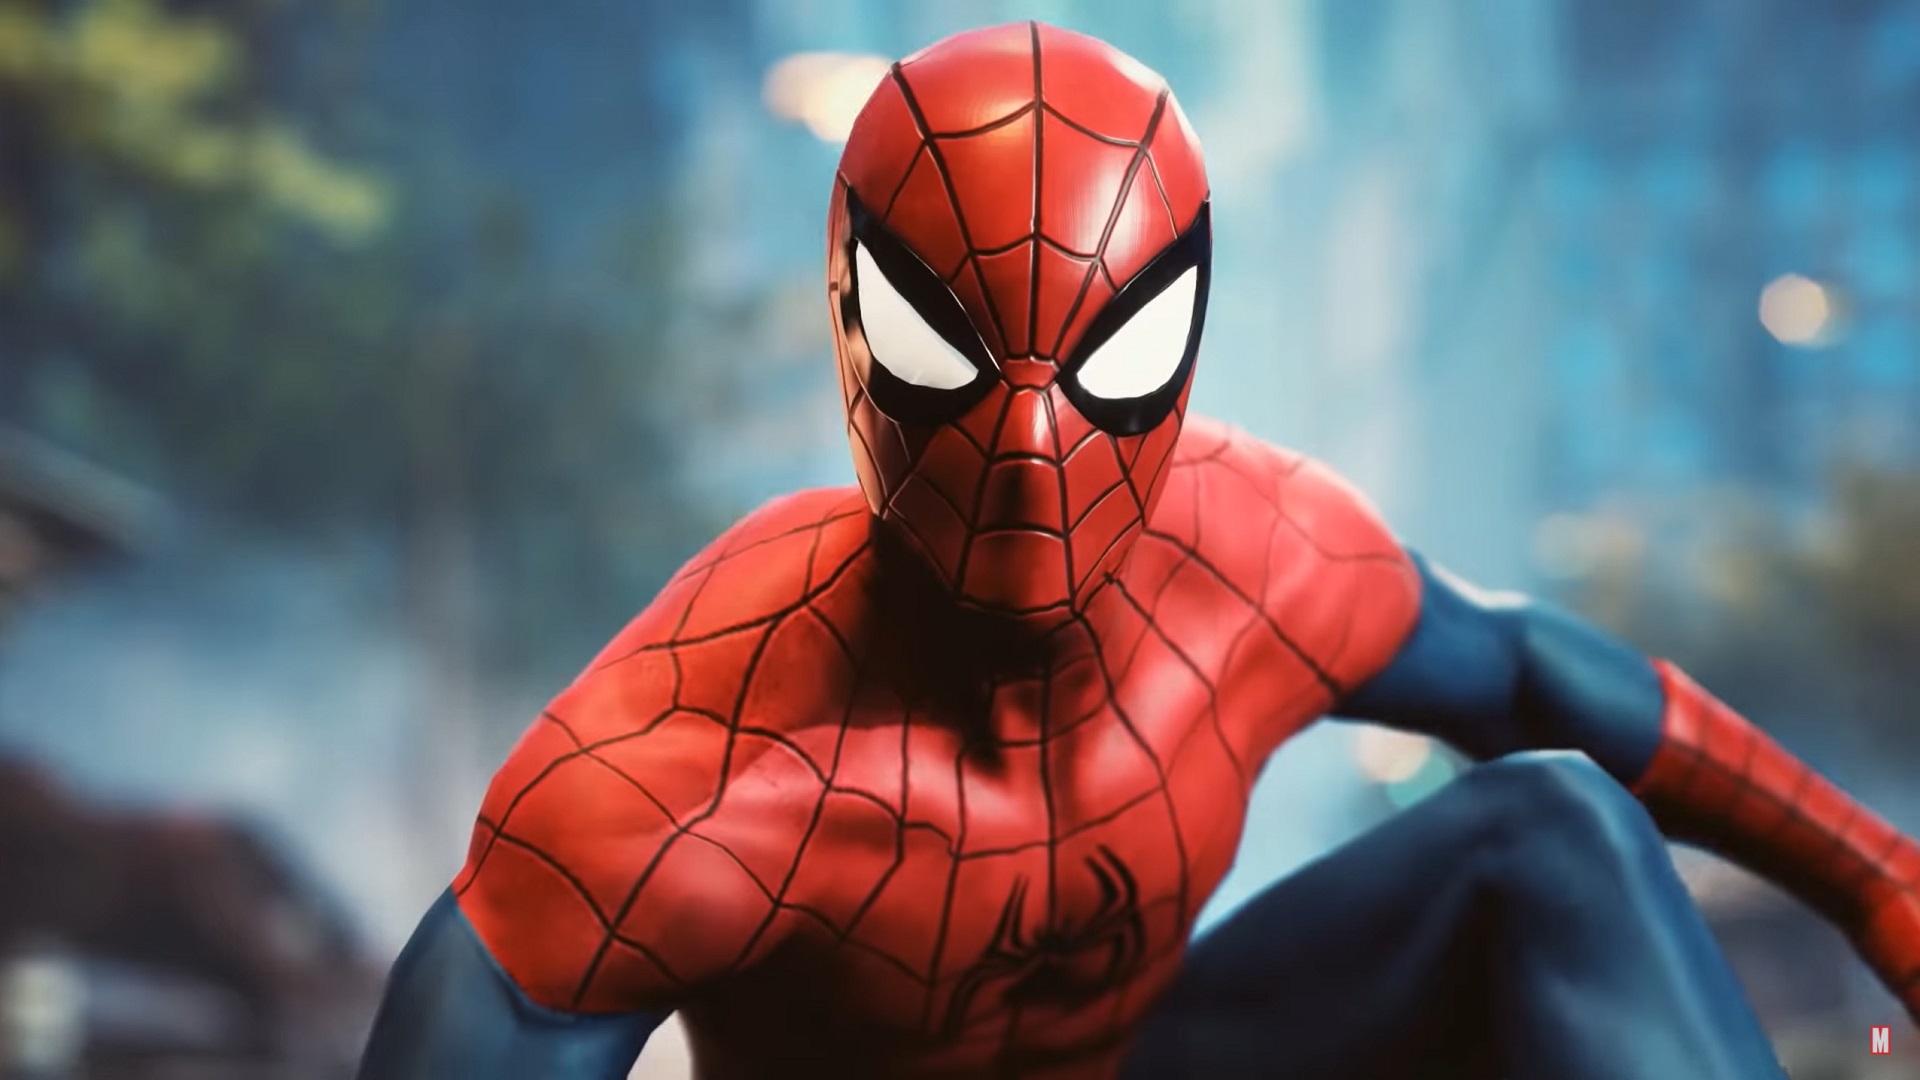 Top 10 Spider Man Games for Android